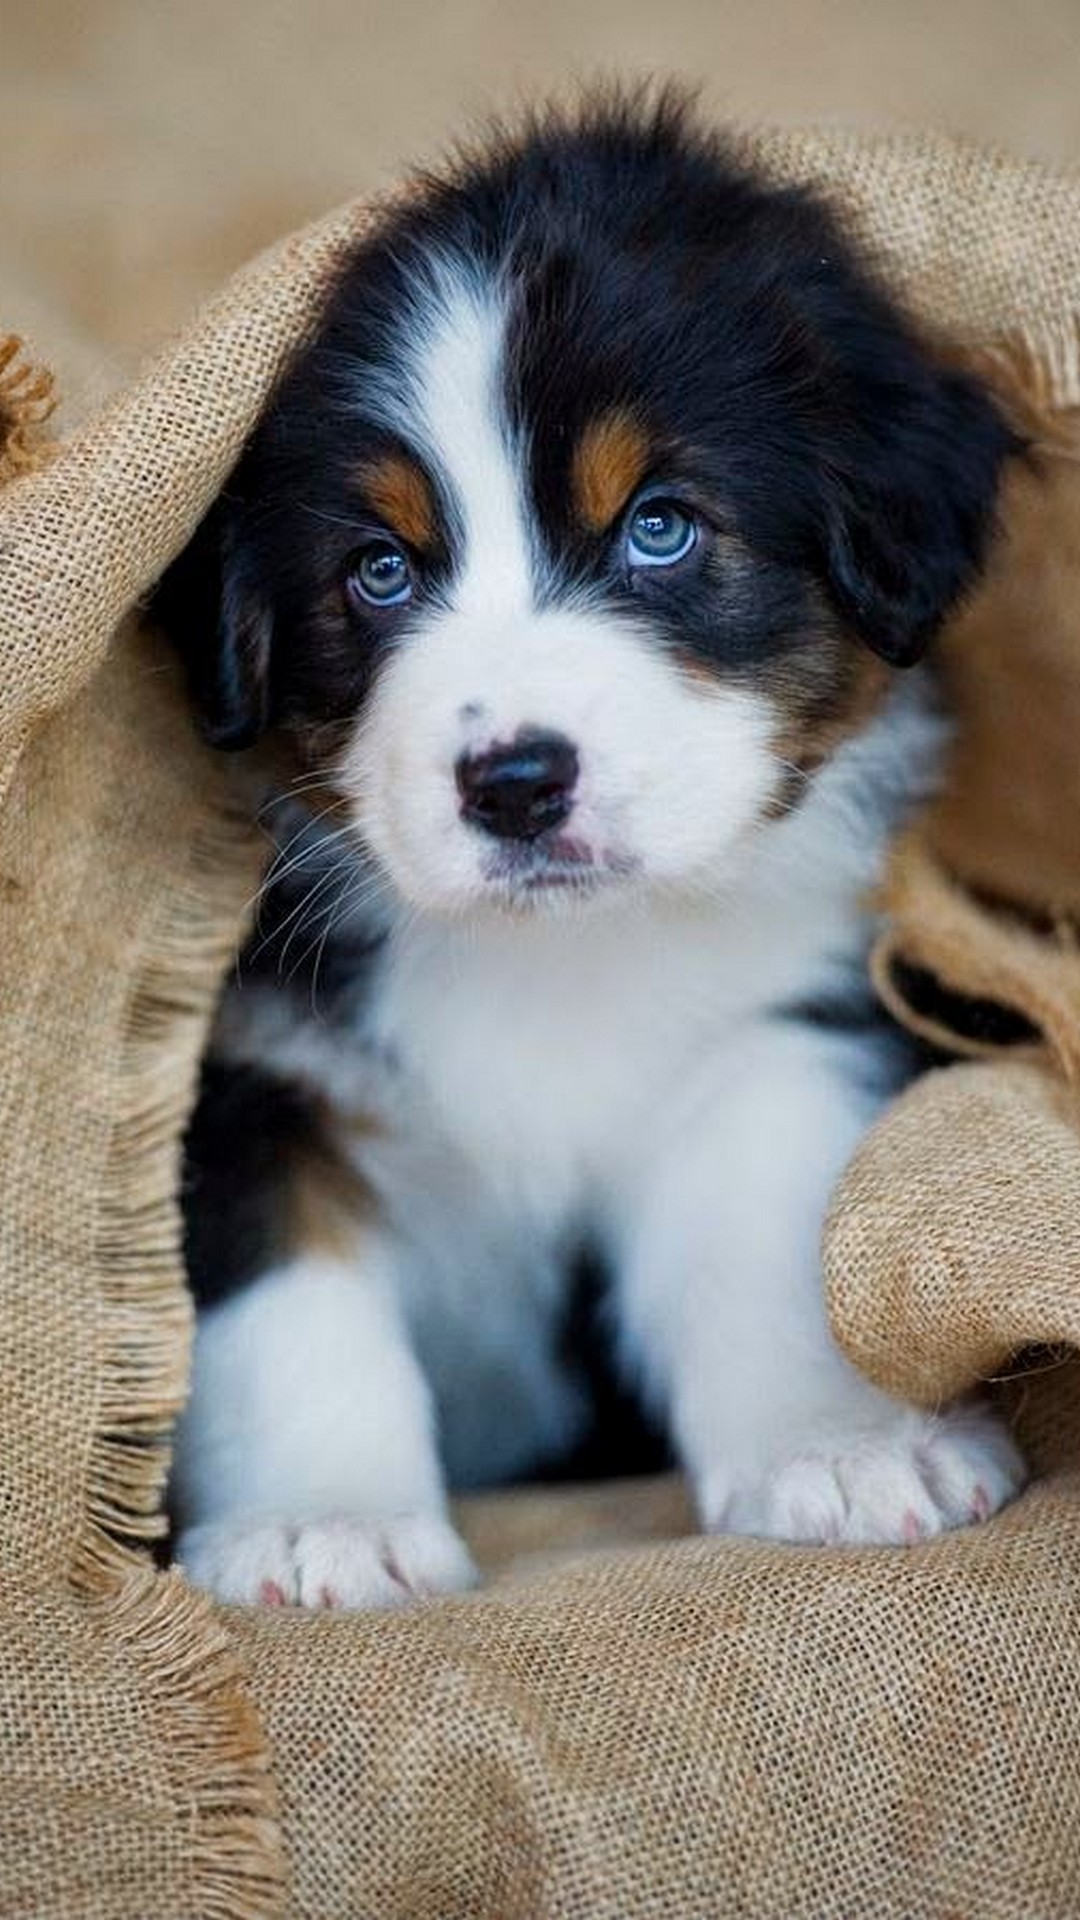 Puppy Wallpaper For Android with HD resolution 1080x1920